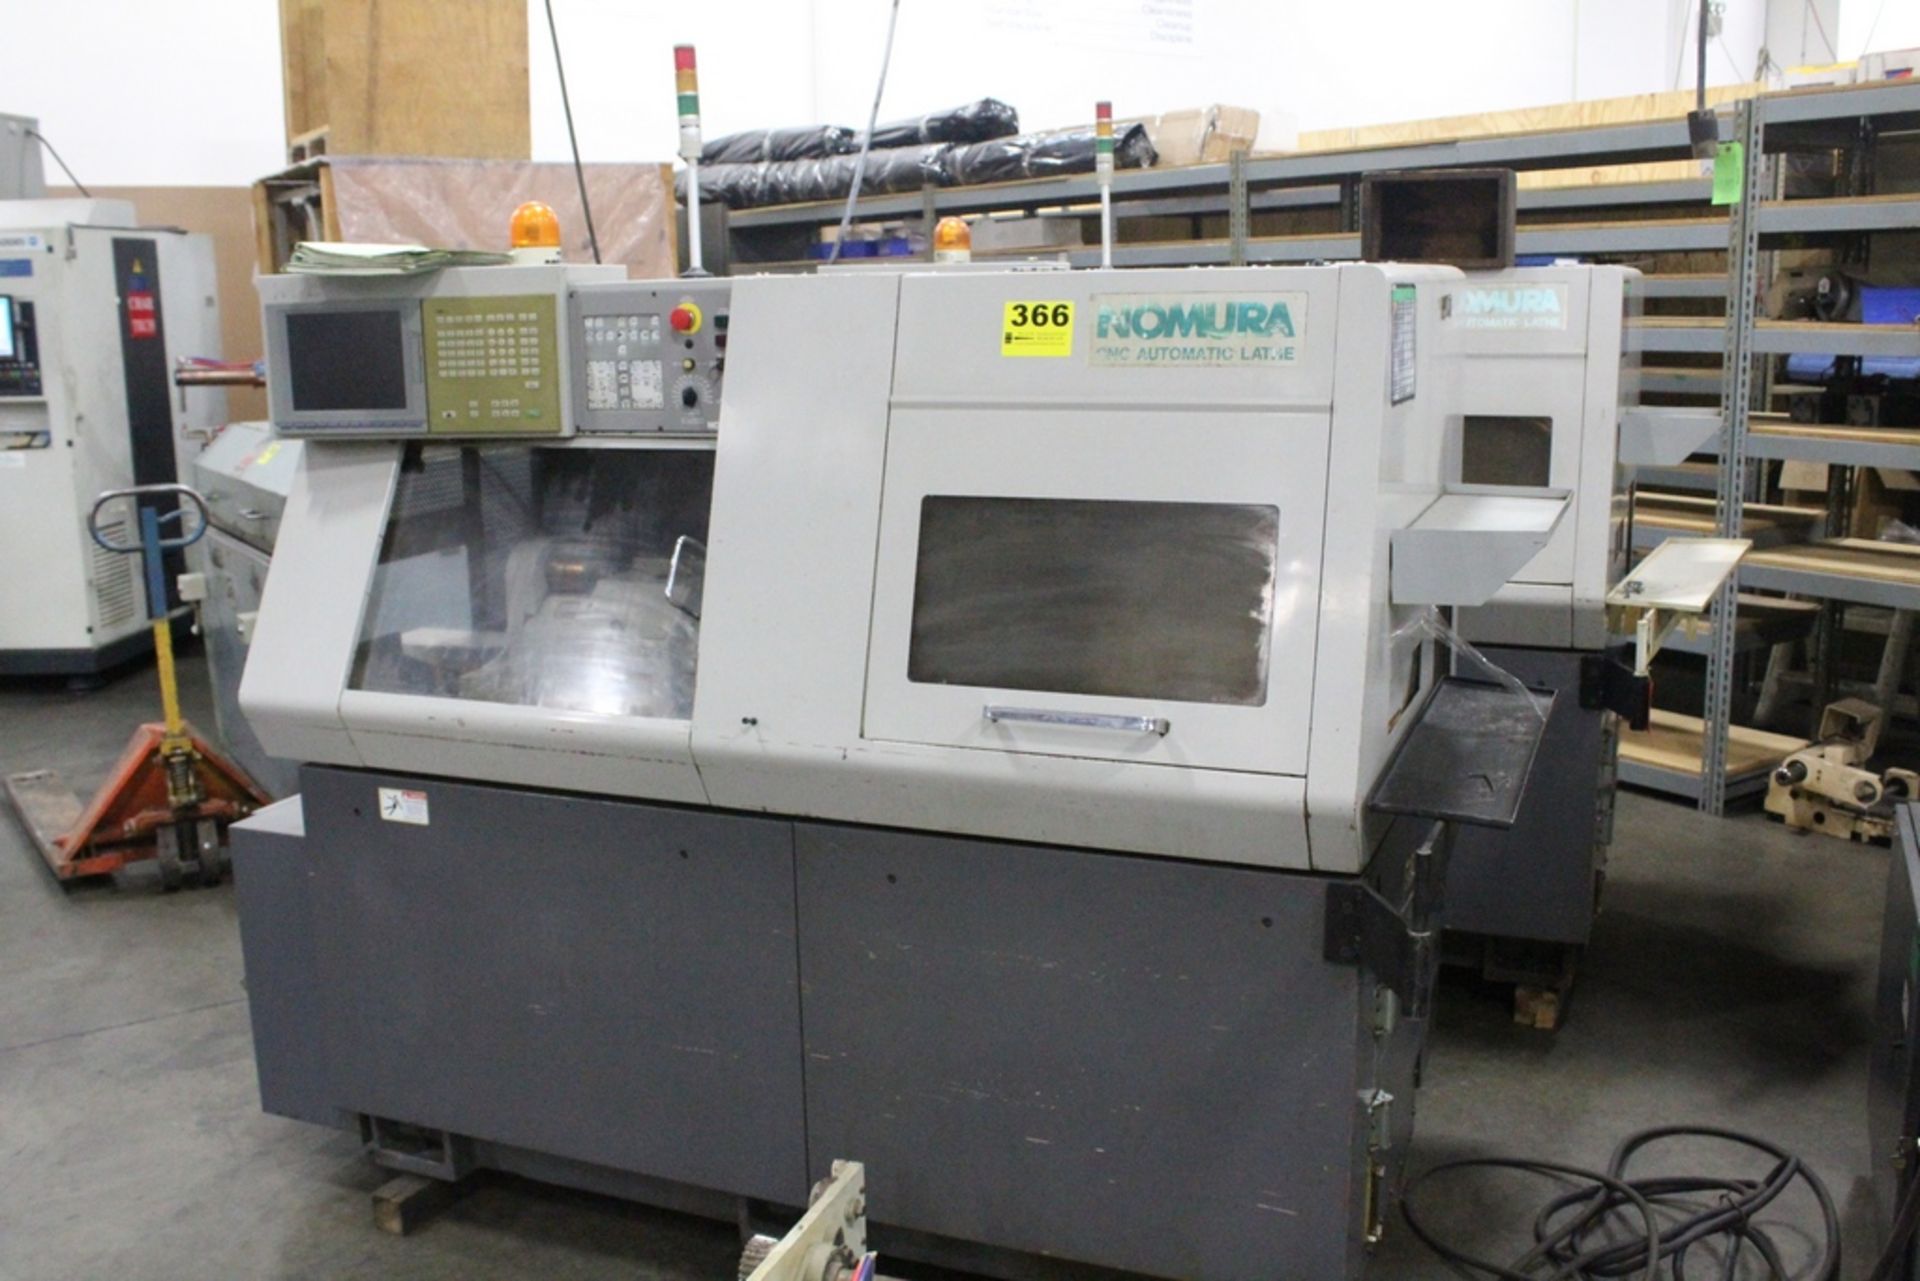 2004 NOMURA NN20B5 CNC SWISS LATHE, SUB SPINDLE, LIVE TOOLING, SN: 25010404, 20-MM, 6-AXIS, 200-MM